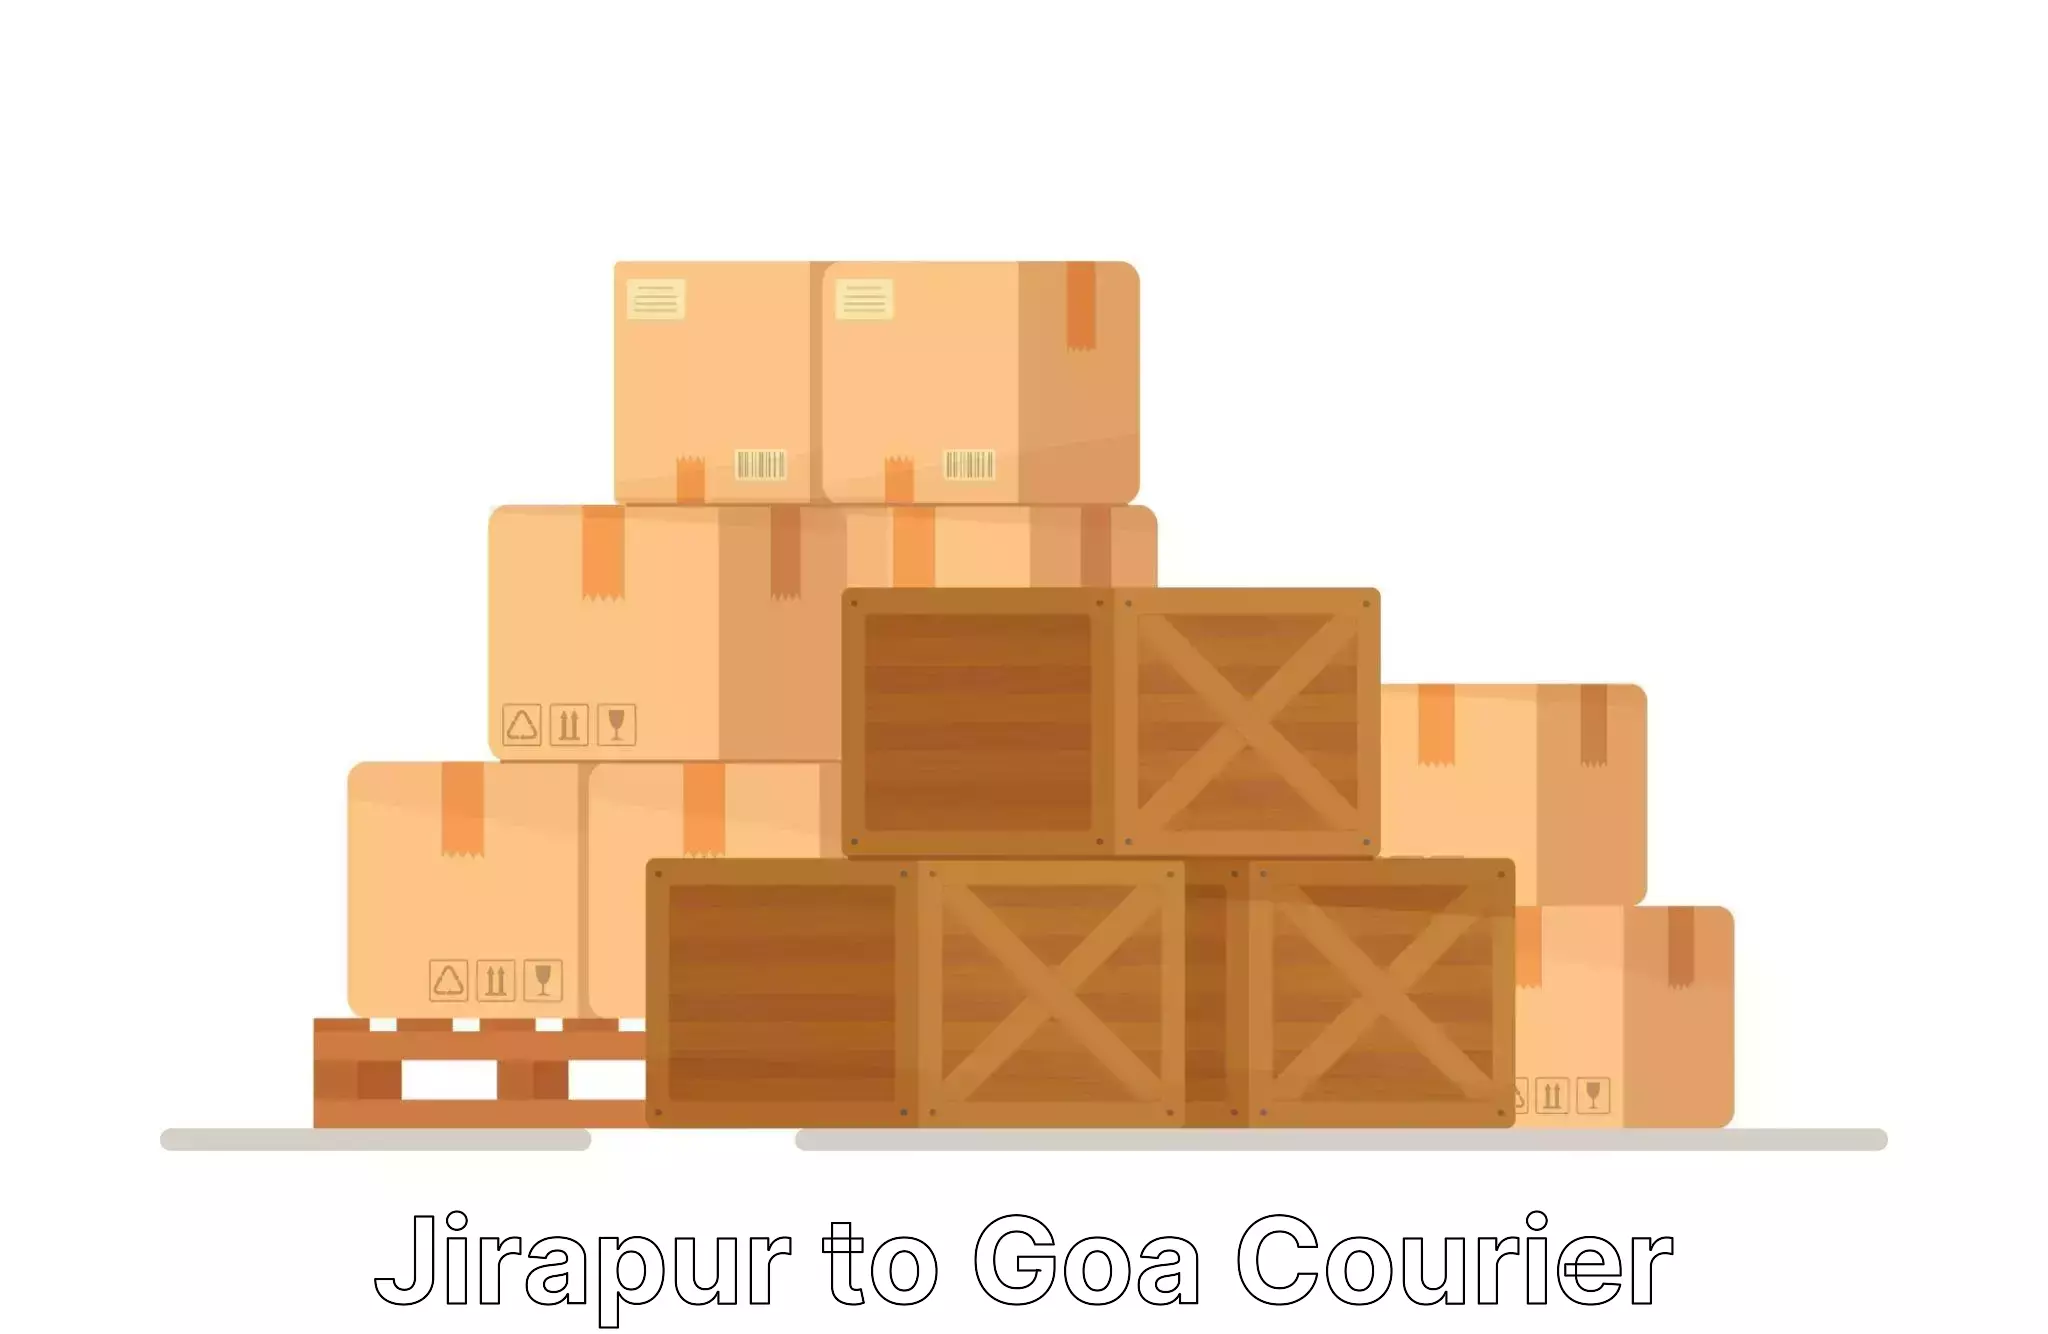 Household transport experts Jirapur to South Goa